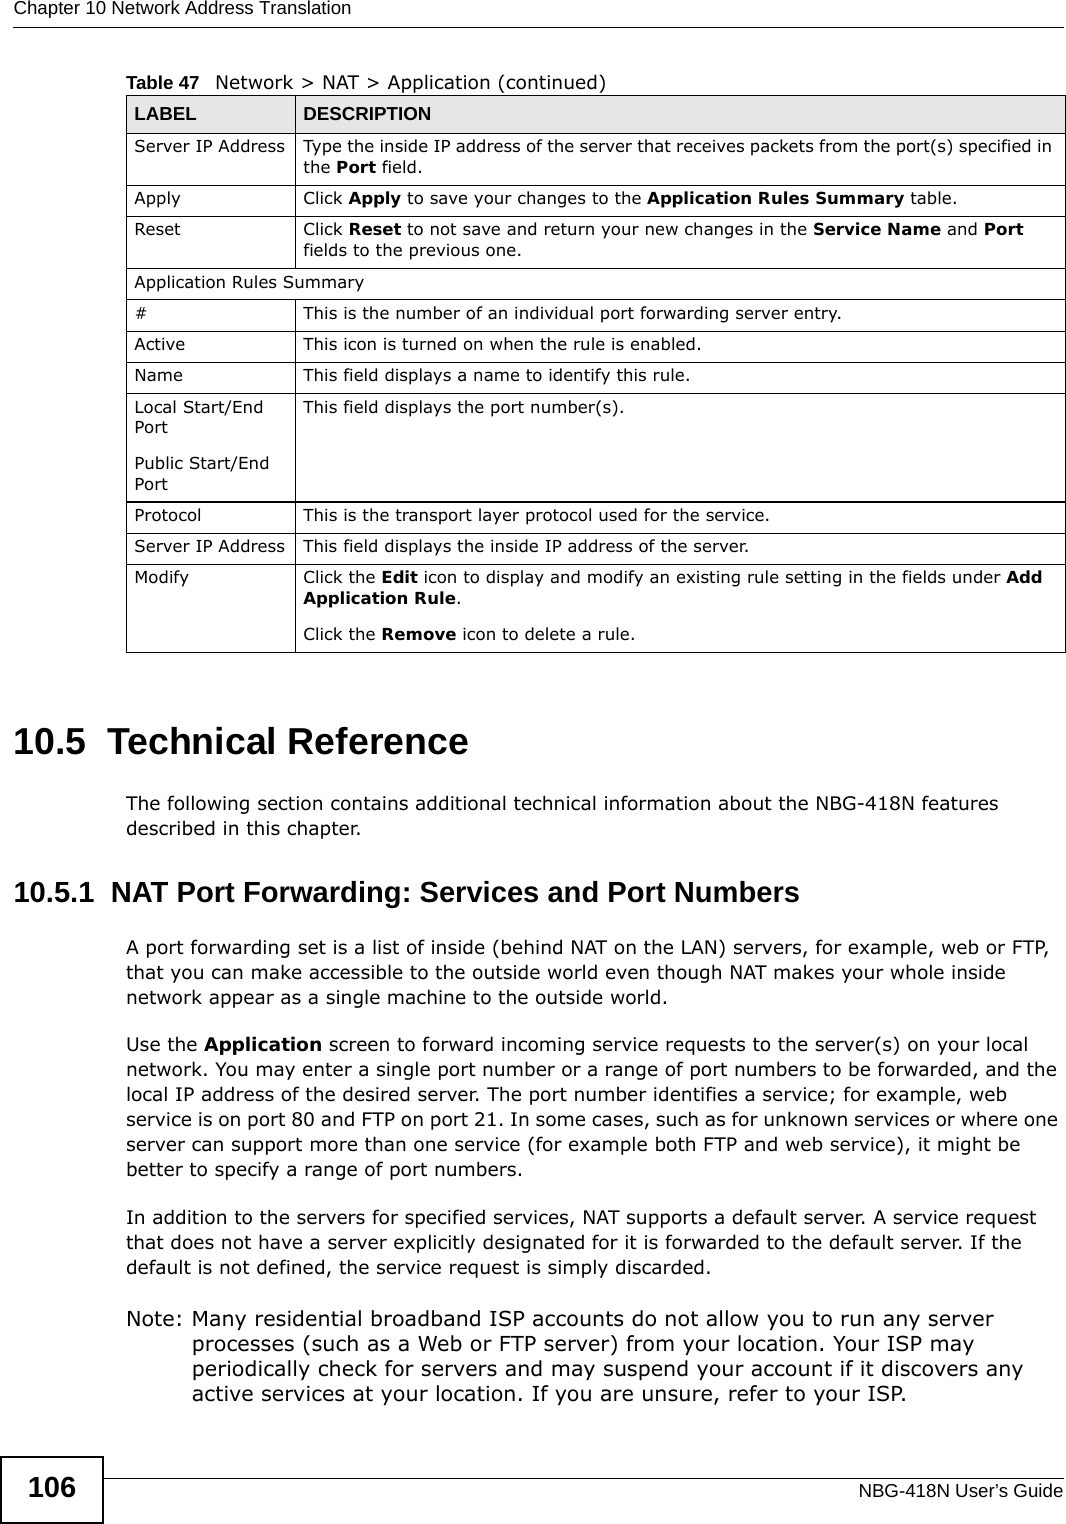 Chapter 10 Network Address TranslationNBG-418N User’s Guide10610.5  Technical ReferenceThe following section contains additional technical information about the NBG-418N features described in this chapter.10.5.1  NAT Port Forwarding: Services and Port NumbersA port forwarding set is a list of inside (behind NAT on the LAN) servers, for example, web or FTP, that you can make accessible to the outside world even though NAT makes your whole inside network appear as a single machine to the outside world. Use the Application screen to forward incoming service requests to the server(s) on your local network. You may enter a single port number or a range of port numbers to be forwarded, and the local IP address of the desired server. The port number identifies a service; for example, web service is on port 80 and FTP on port 21. In some cases, such as for unknown services or where one server can support more than one service (for example both FTP and web service), it might be better to specify a range of port numbers.In addition to the servers for specified services, NAT supports a default server. A service request that does not have a server explicitly designated for it is forwarded to the default server. If the default is not defined, the service request is simply discarded.Note: Many residential broadband ISP accounts do not allow you to run any server processes (such as a Web or FTP server) from your location. Your ISP may periodically check for servers and may suspend your account if it discovers any active services at your location. If you are unsure, refer to your ISP.Server IP Address Type the inside IP address of the server that receives packets from the port(s) specified in the Port field.Apply Click Apply to save your changes to the Application Rules Summary table.Reset Click Reset to not save and return your new changes in the Service Name and Port fields to the previous one.Application Rules Summary#This is the number of an individual port forwarding server entry.Active This icon is turned on when the rule is enabled. Name This field displays a name to identify this rule.Local Start/End PortPublic Start/End PortThis field displays the port number(s). Protocol This is the transport layer protocol used for the service.Server IP Address This field displays the inside IP address of the server.Modify Click the Edit icon to display and modify an existing rule setting in the fields under Add Application Rule. Click the Remove icon to delete a rule.Table 47   Network &gt; NAT &gt; Application (continued)LABEL DESCRIPTION